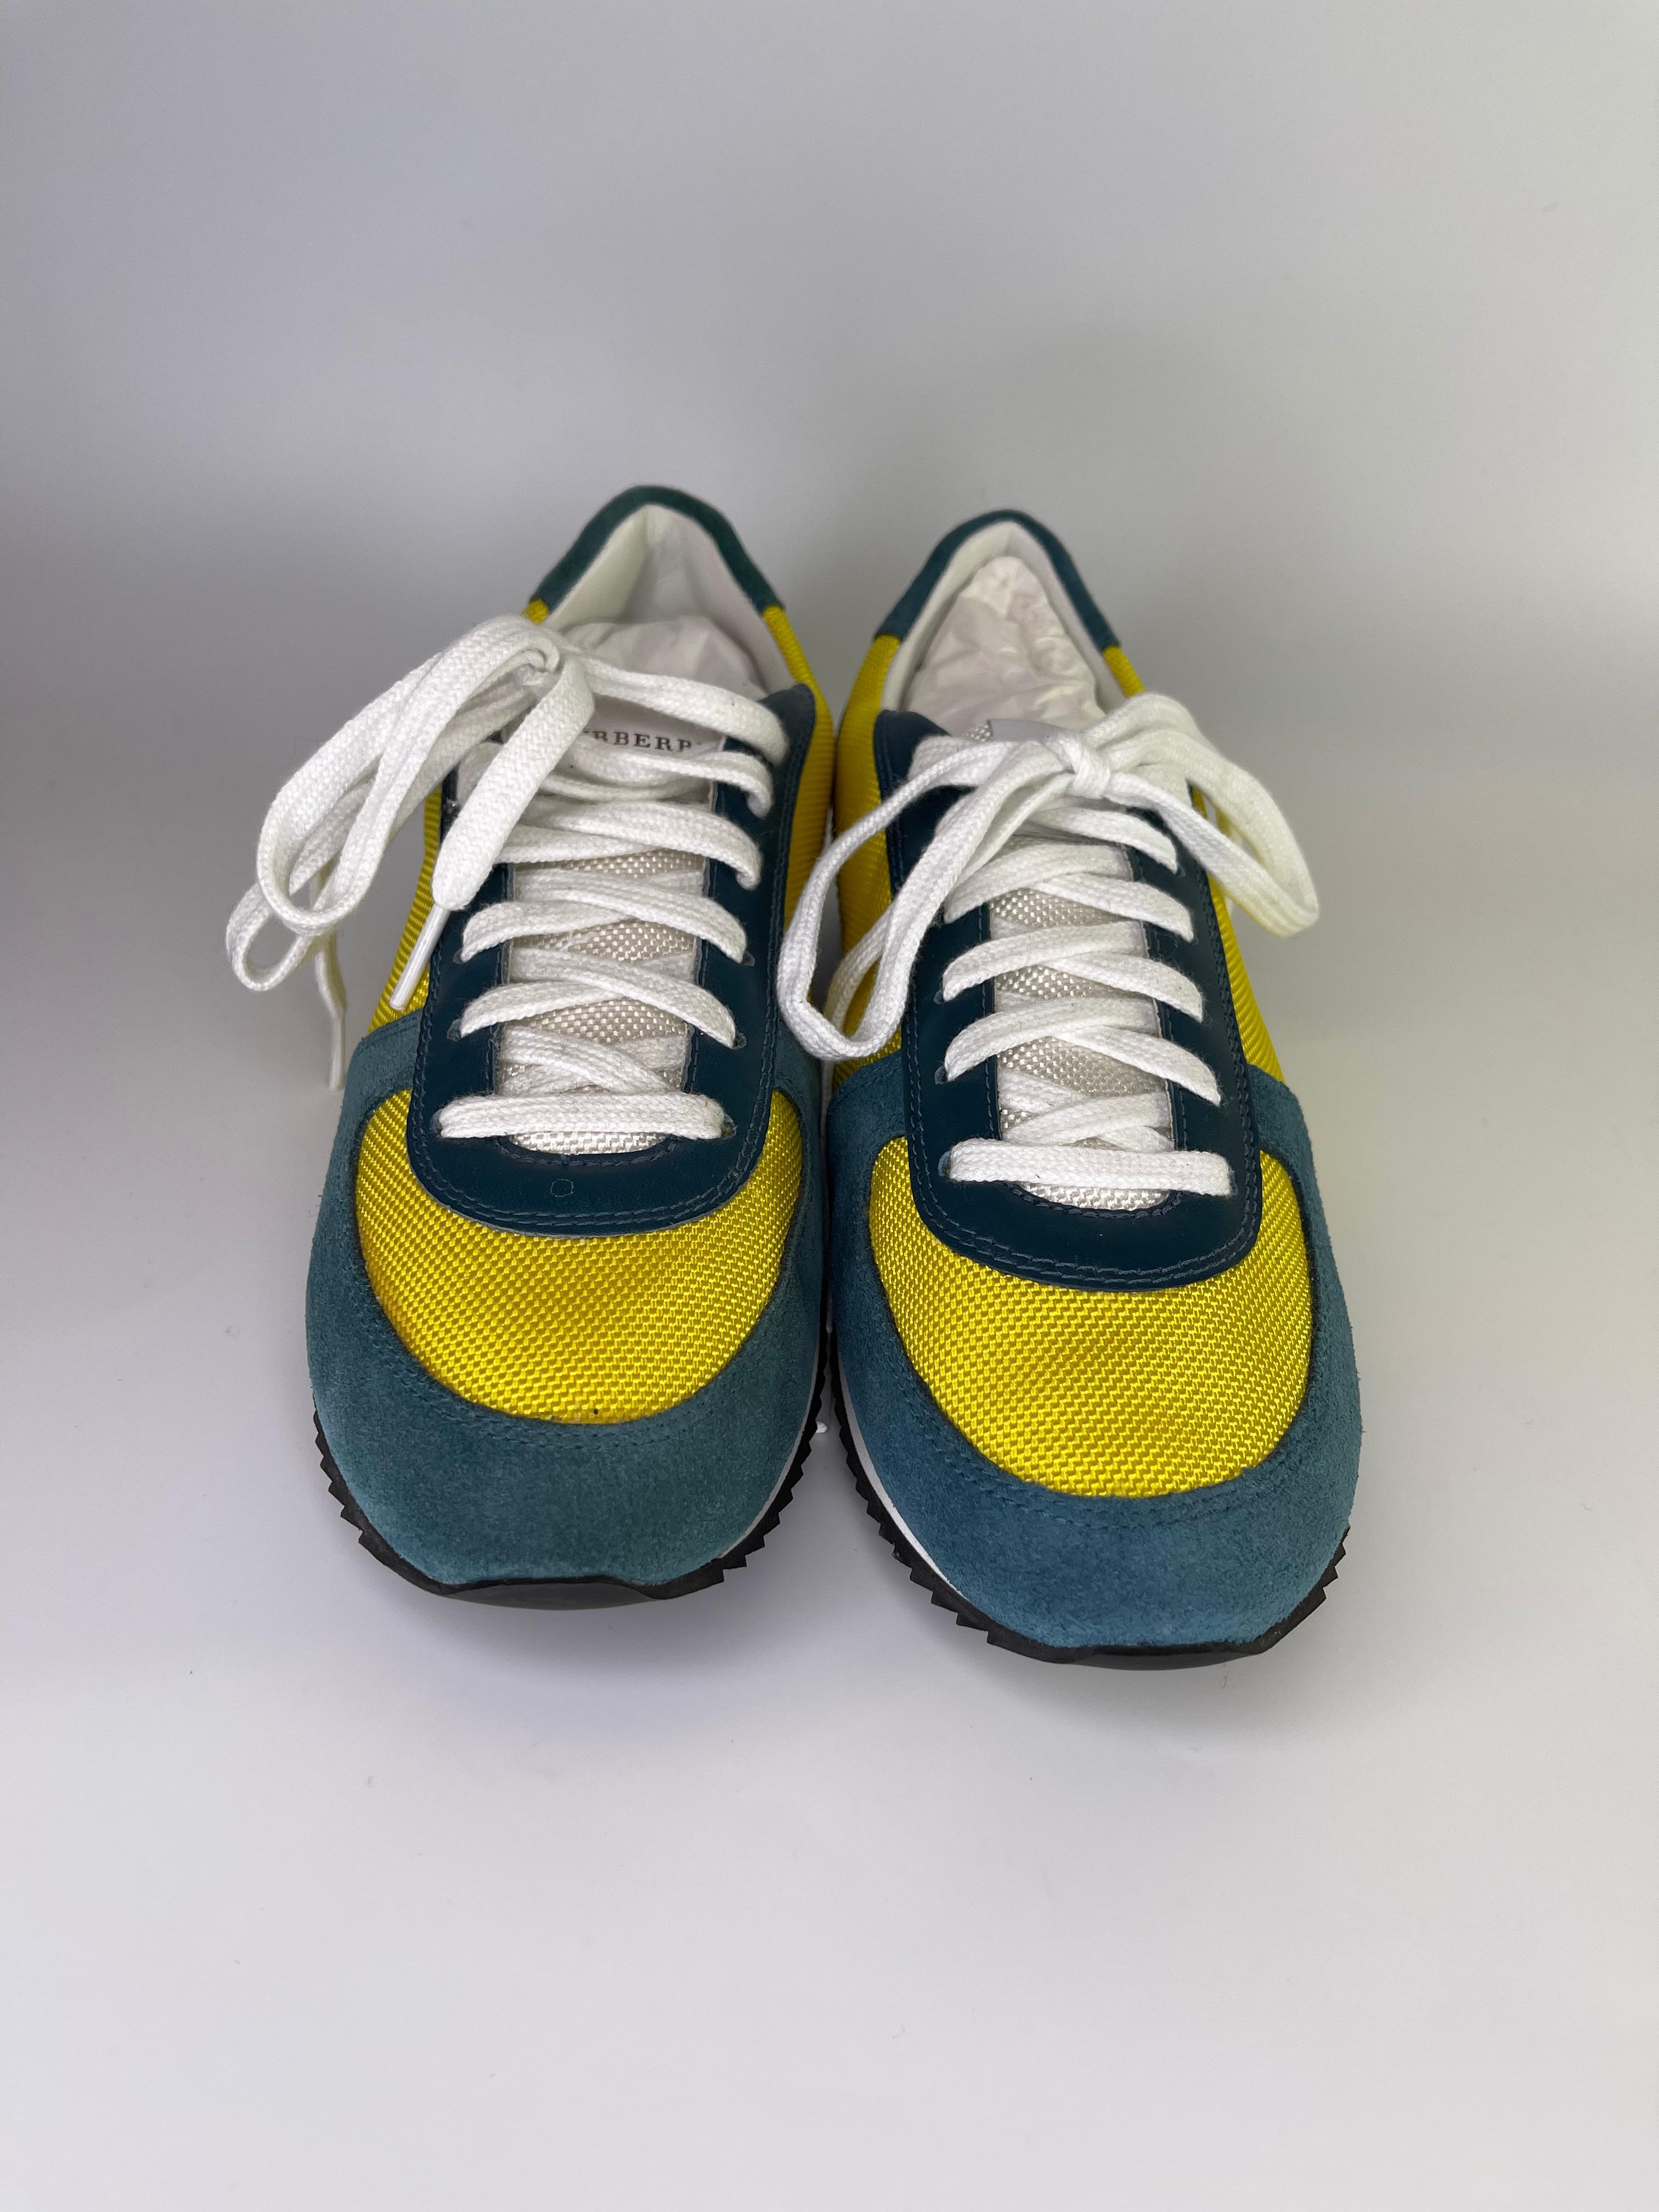 These Burberry runners feature University of Michigan colors blue and yellow. Perfect for Ann Arbor Students! They are made with yellow nylon and blue suede with contrasting white shoe laces. 

COLOR: Blue/yellow
MATERIAL: Nylon/suede
ITEM CODE: